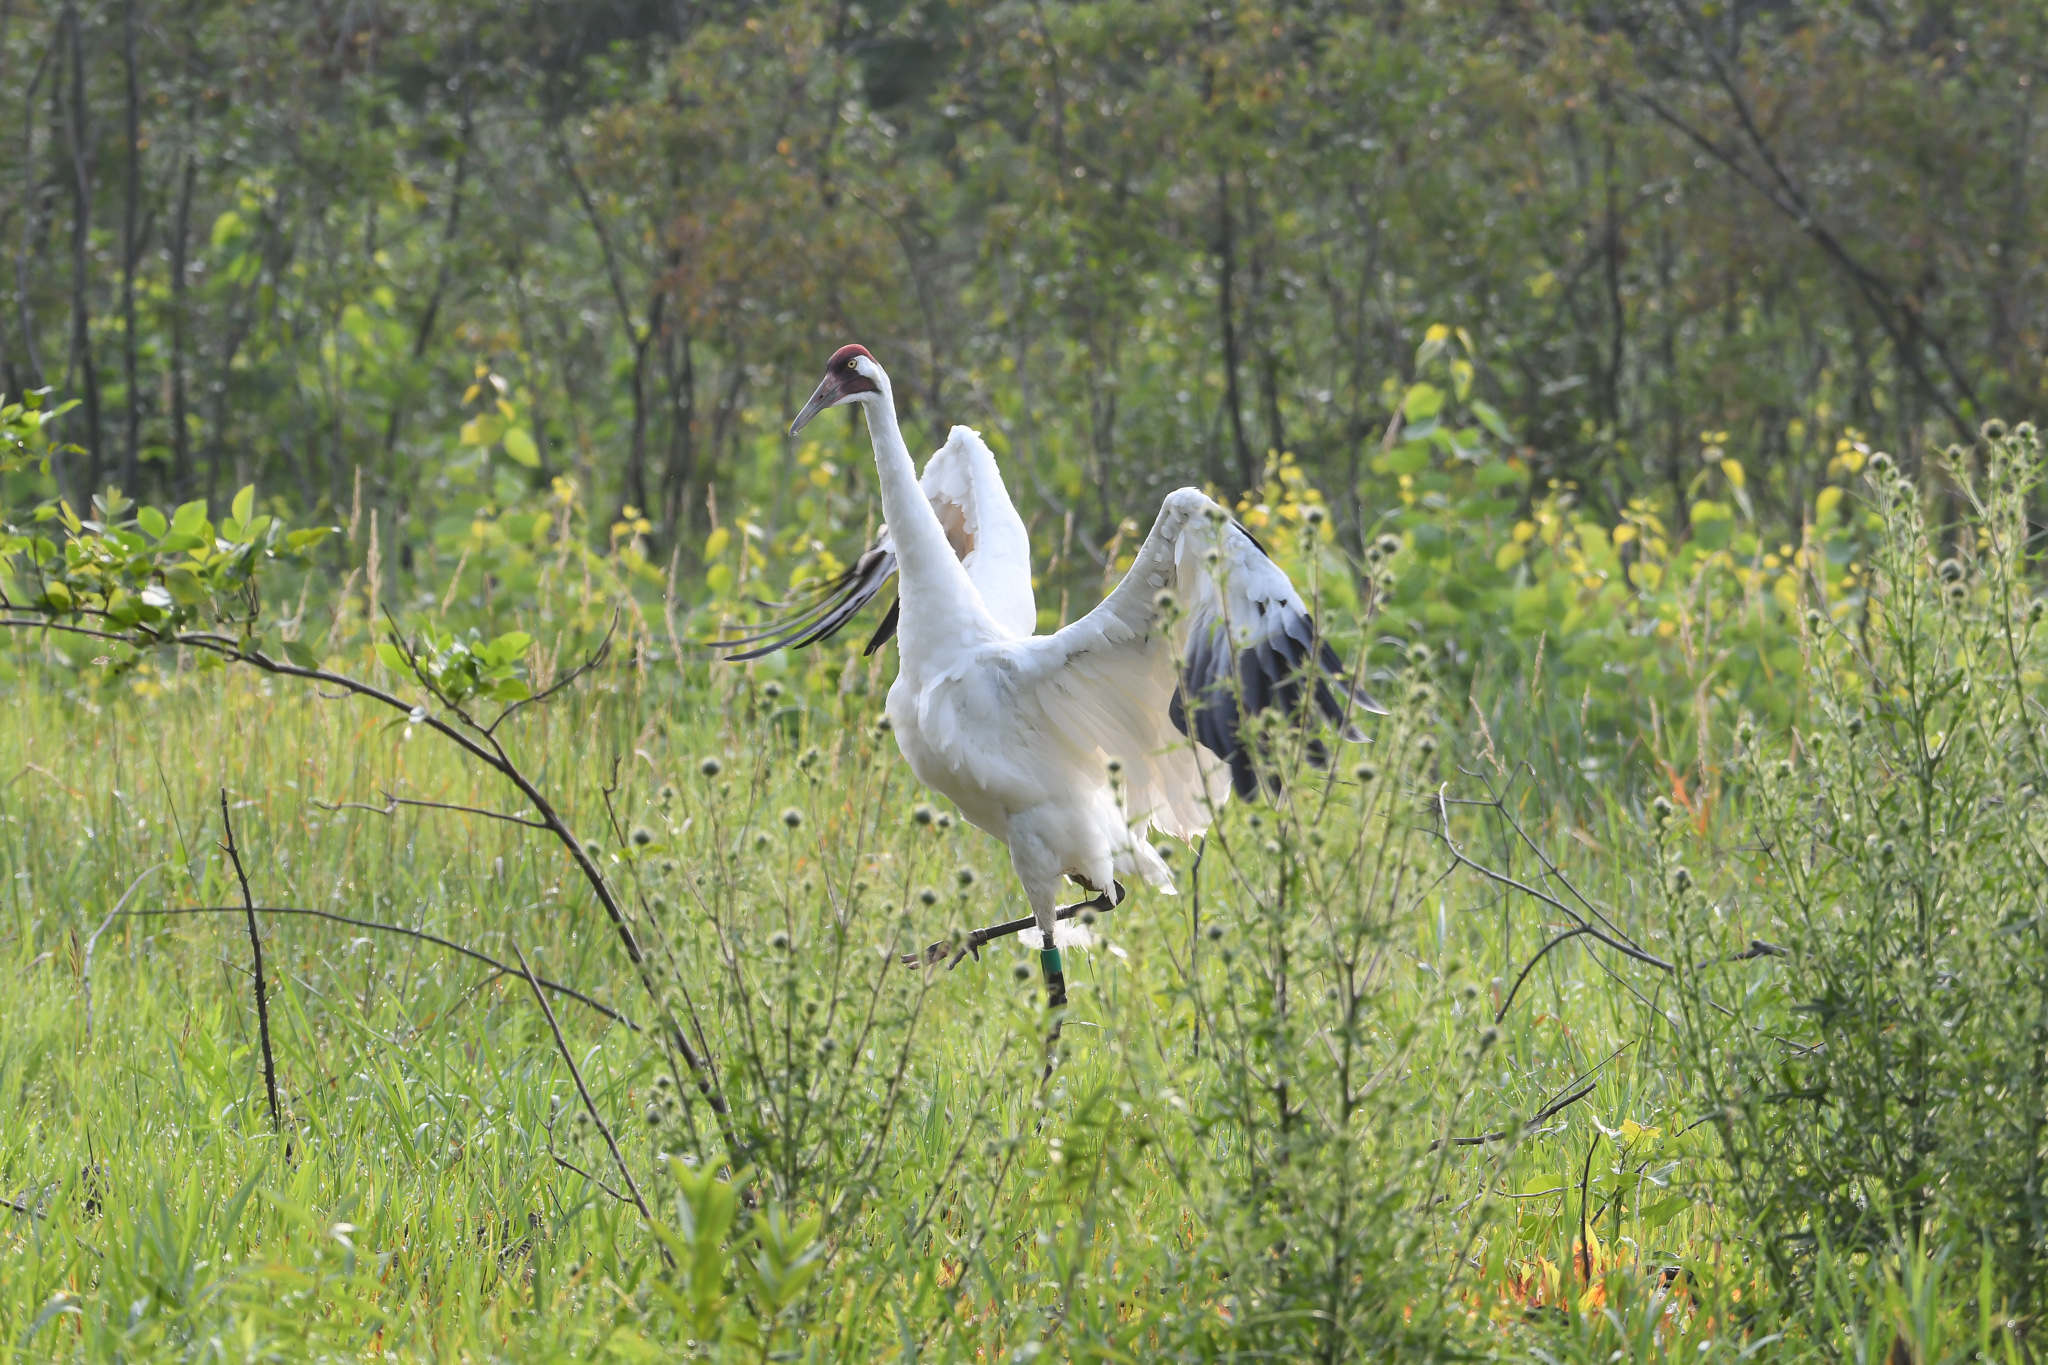 An adult Whooping Crane stands in some scrubby bushes with his wings outstretched.